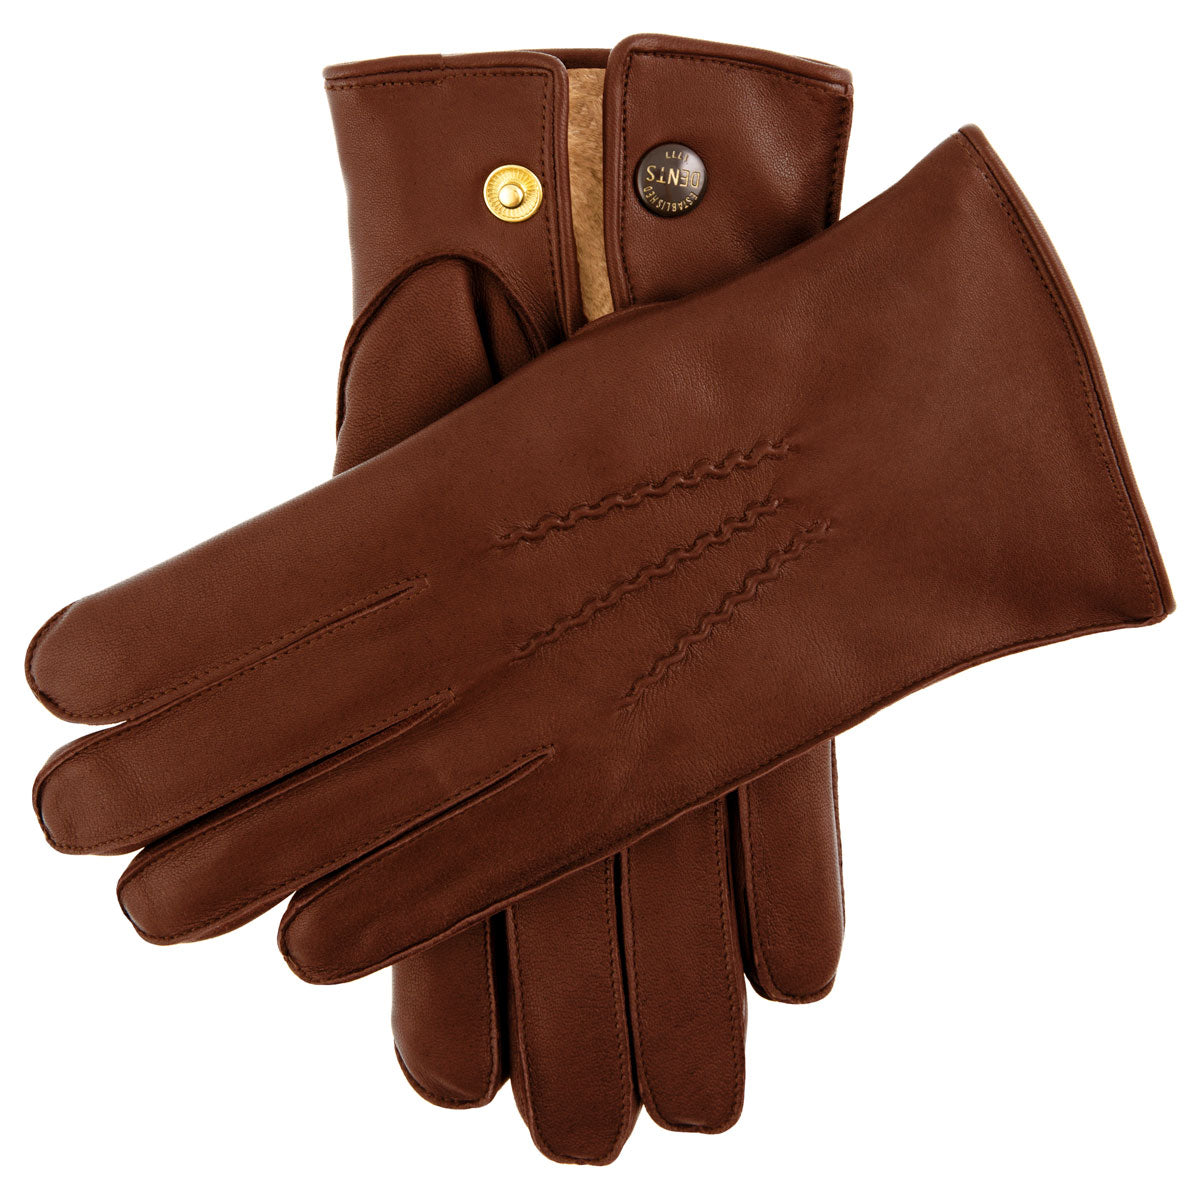 Men's fur lined leather gloves in english tan